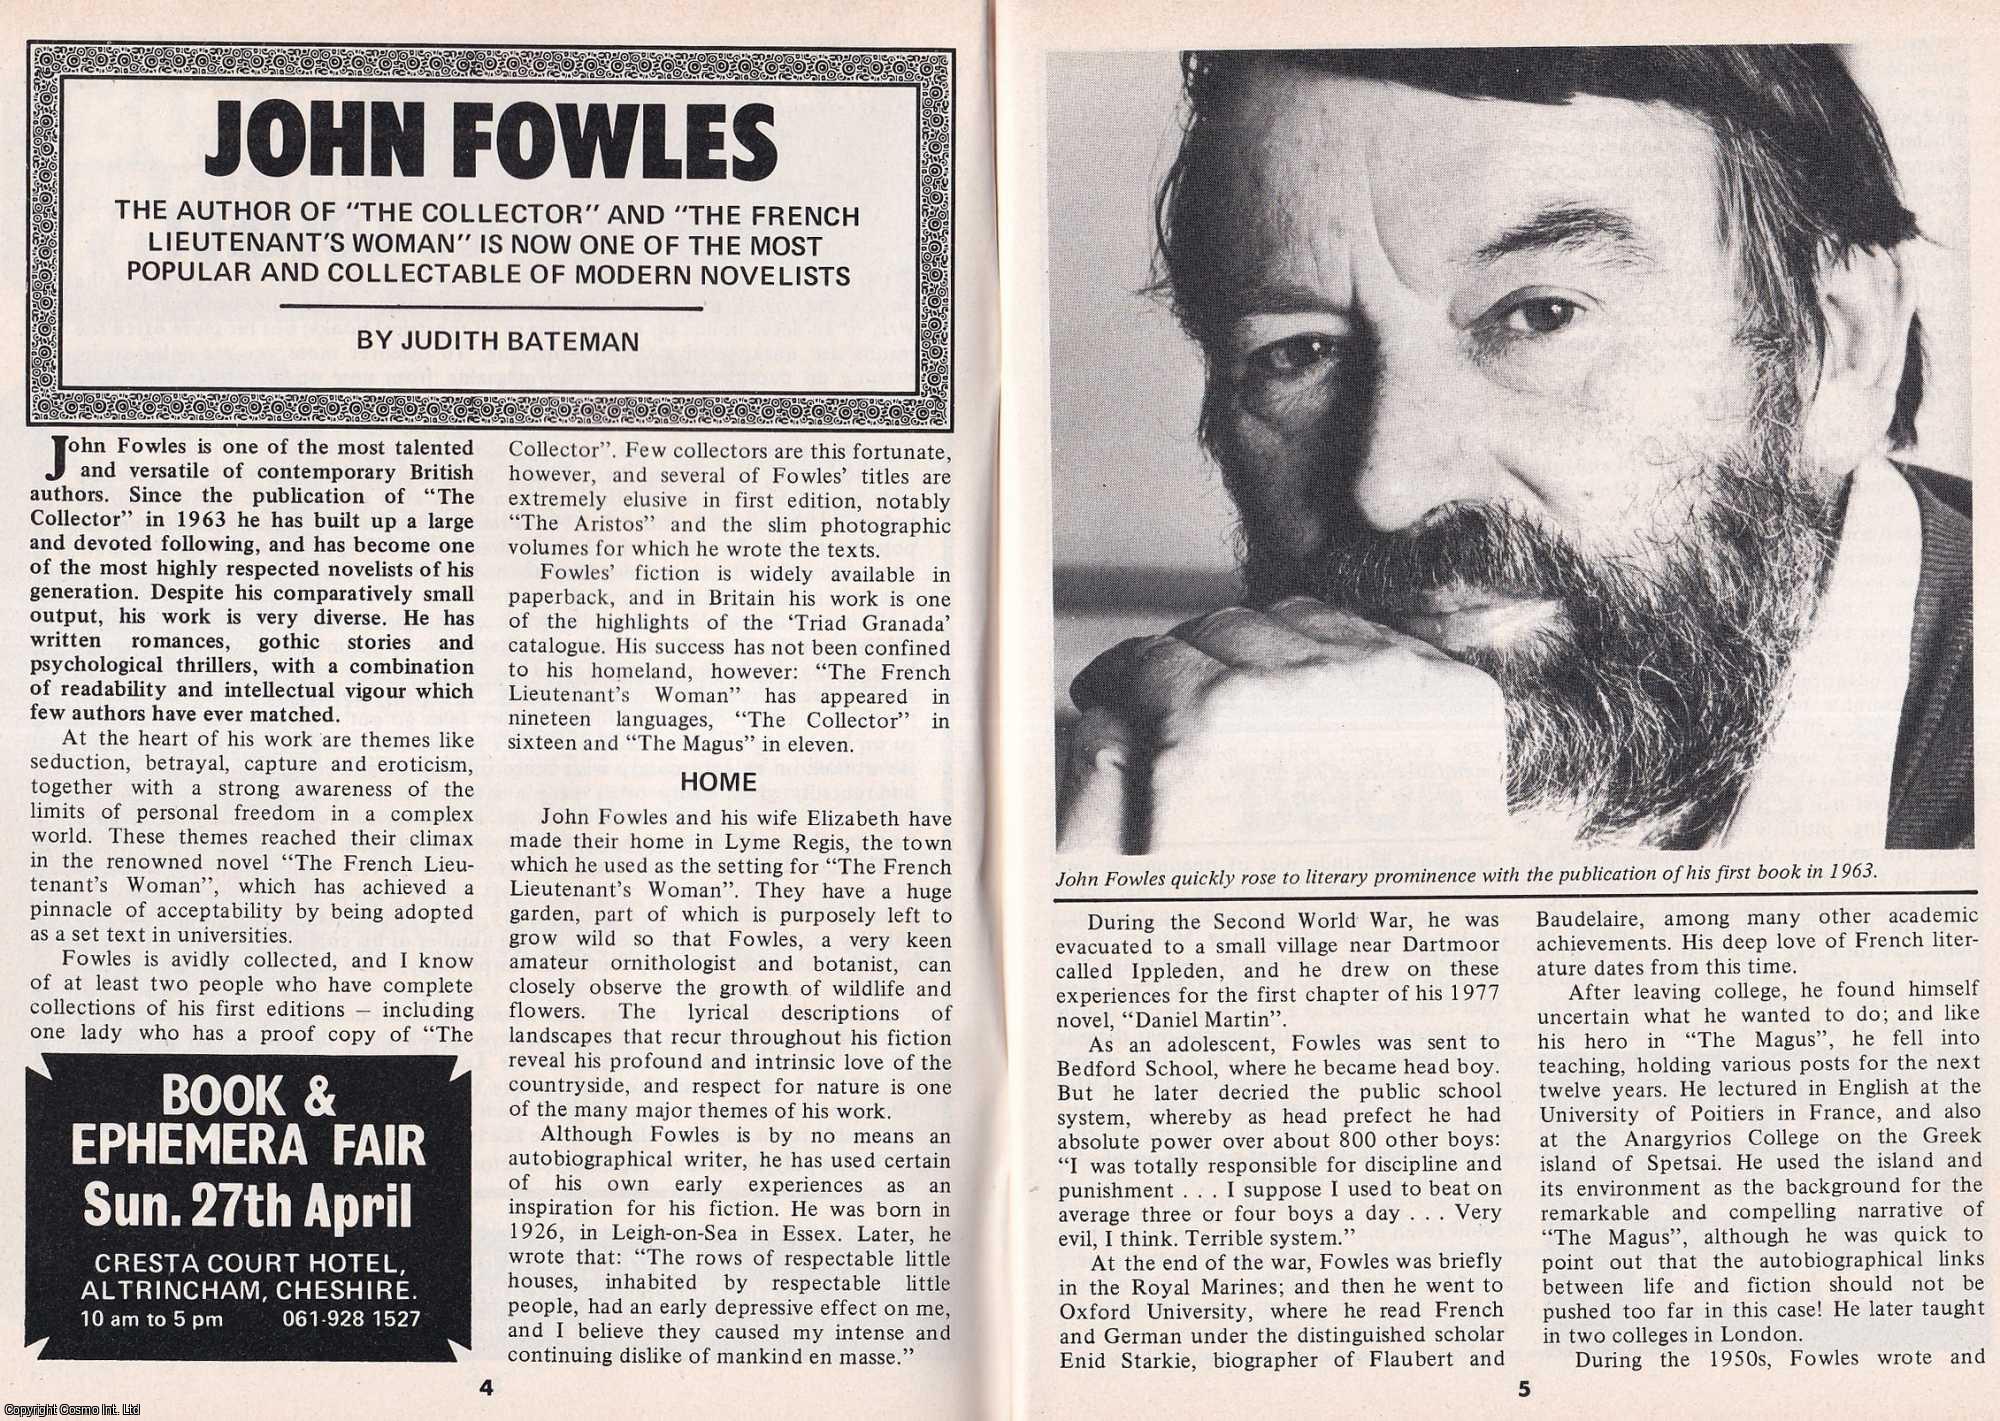 Judith Bateman - John Fowles. The Author of The French Lieutenant's Woman. This is an original article separated from an issue of The Book & Magazine Collector publication.